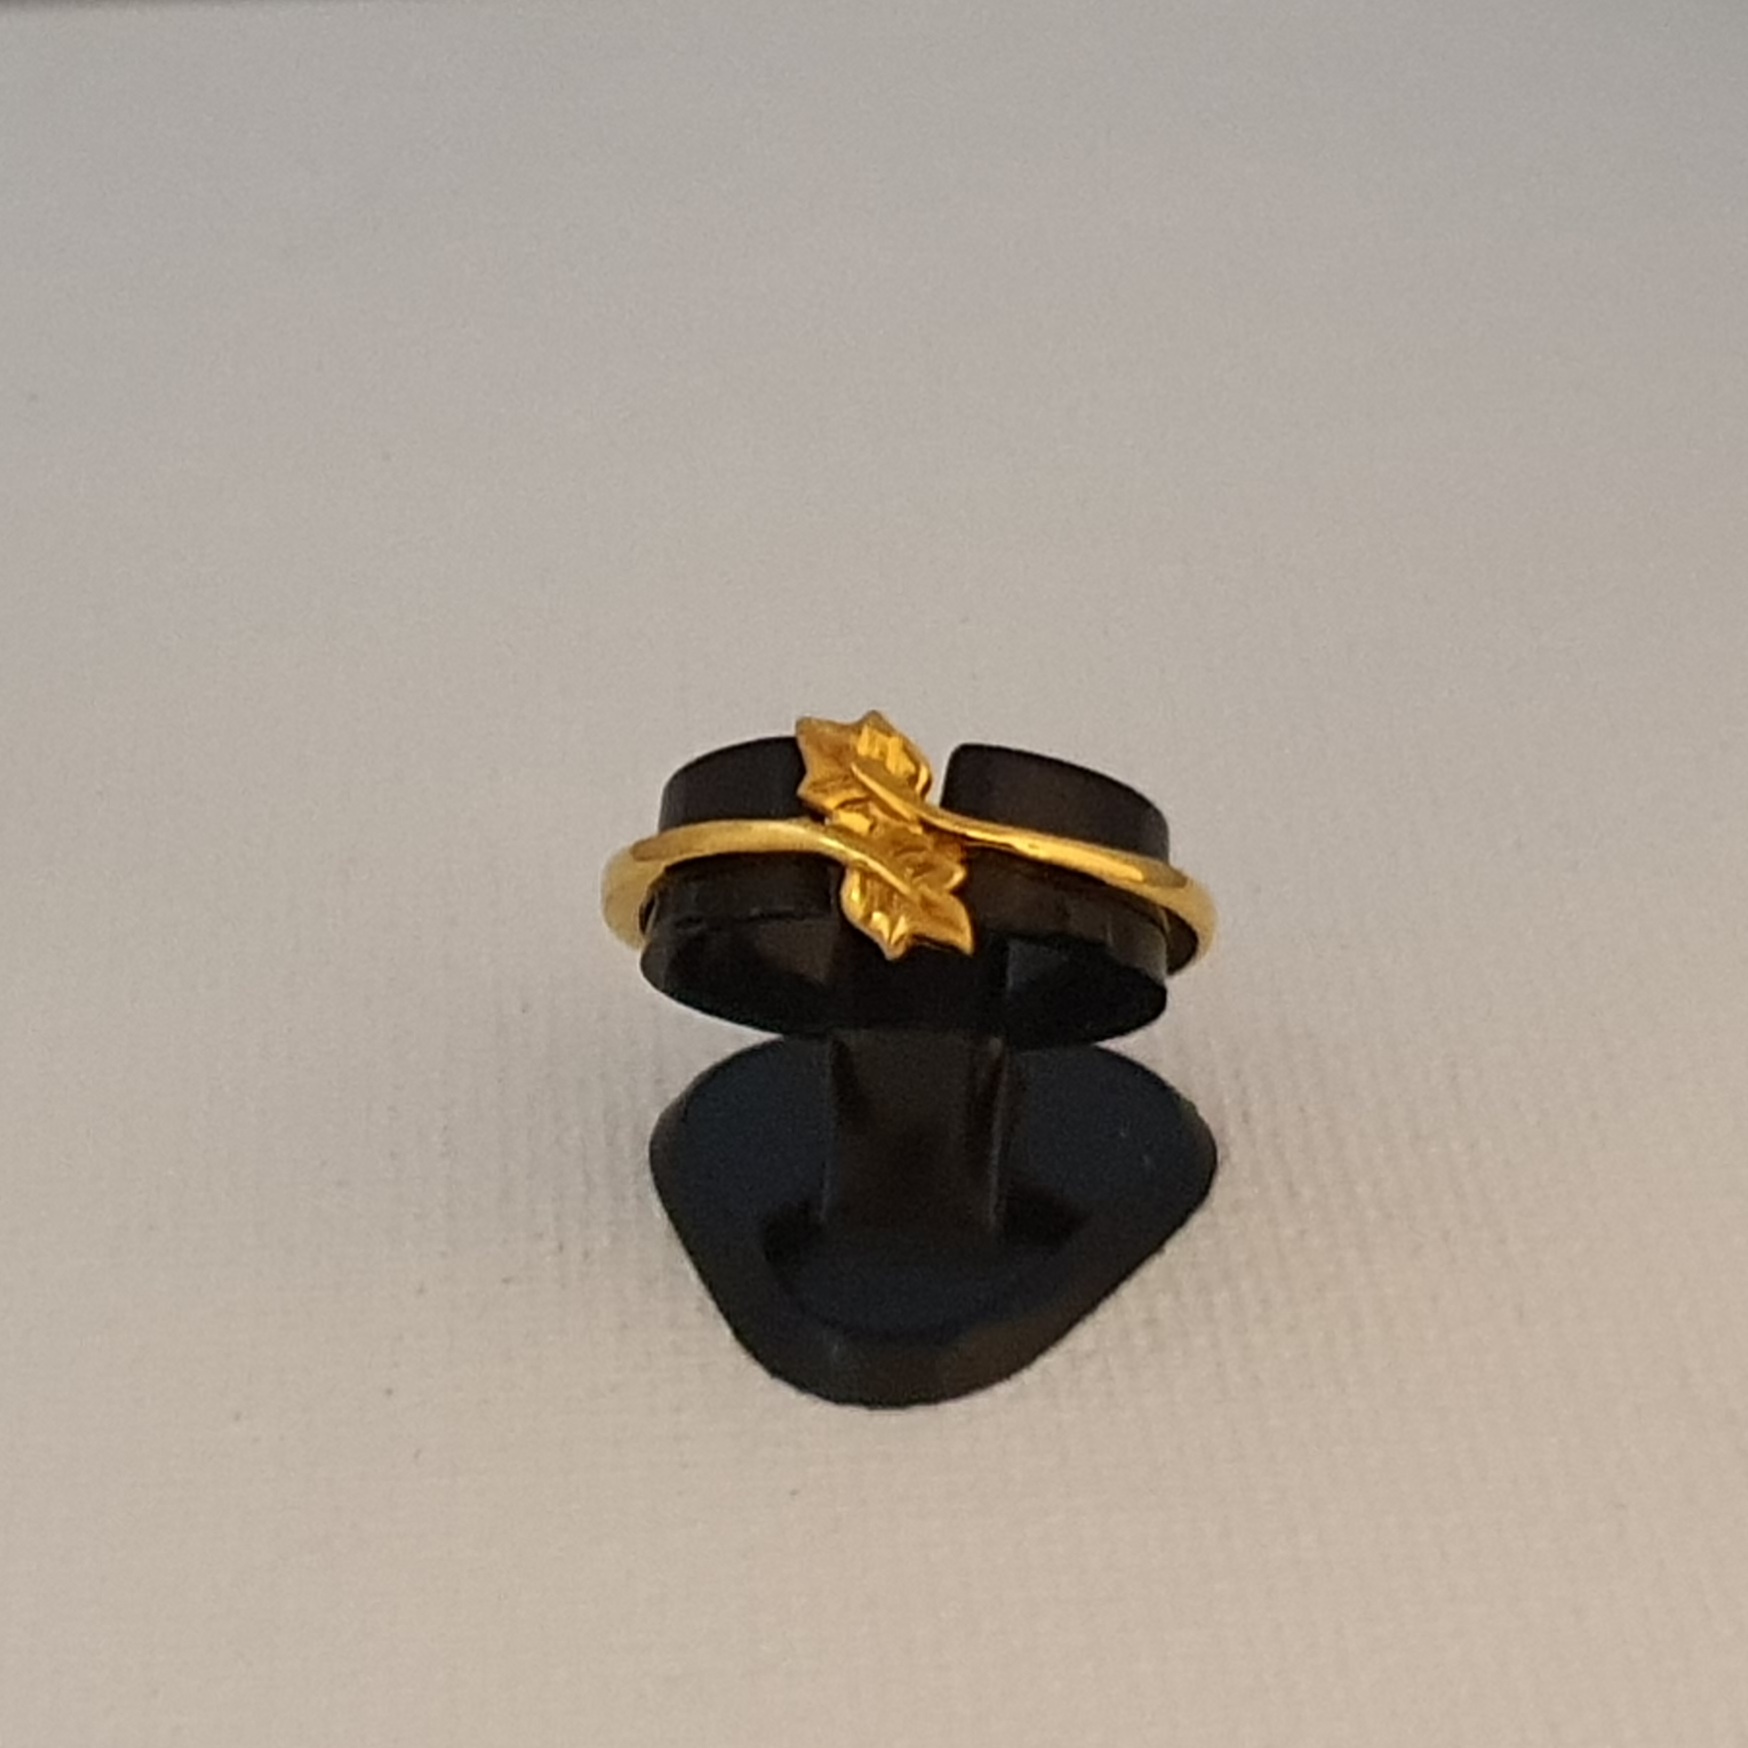 RINGS, 3+1 pcs, 18k gold. Swedish stamps. Rings Weight about 9.8 grams.  Signet ring 3.6 grams. Jewellery & Gemstones - Rings - Auctionet